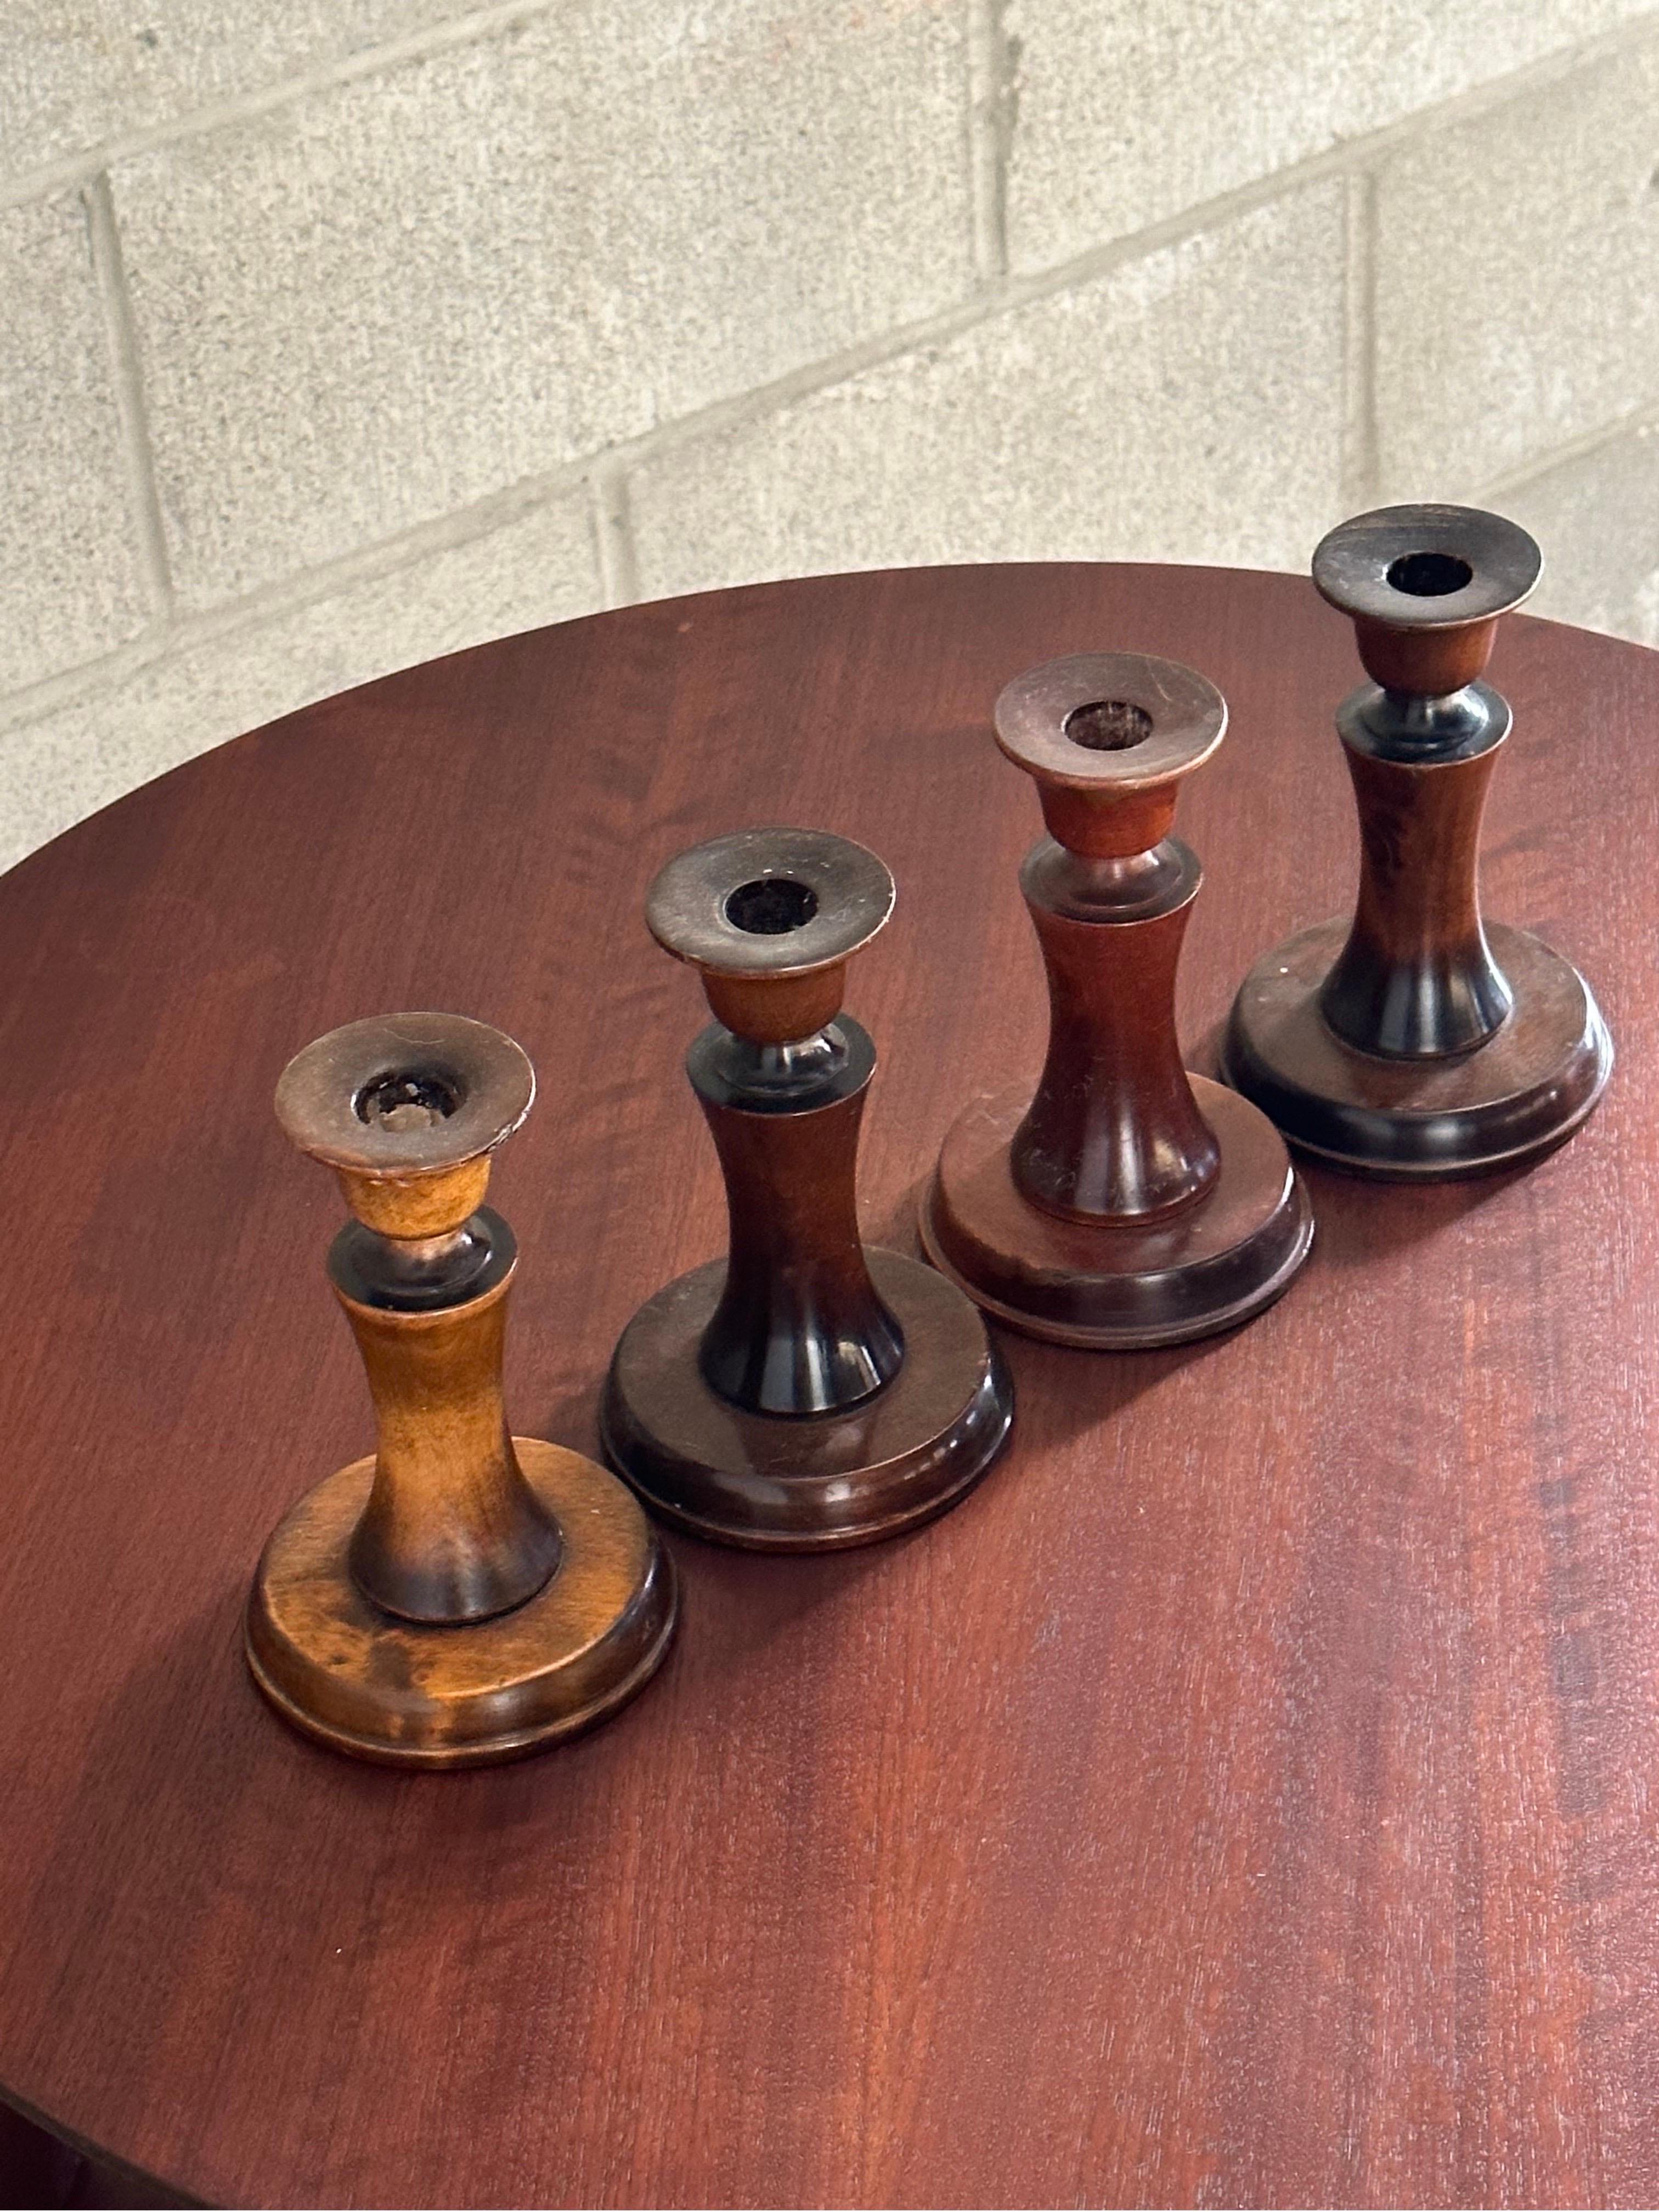 Rare set of four candle holders designed by Carl Malmsten. Has an elegant swedish craftsman feel to them. These have been used and show signs of such. All are marked on bottom